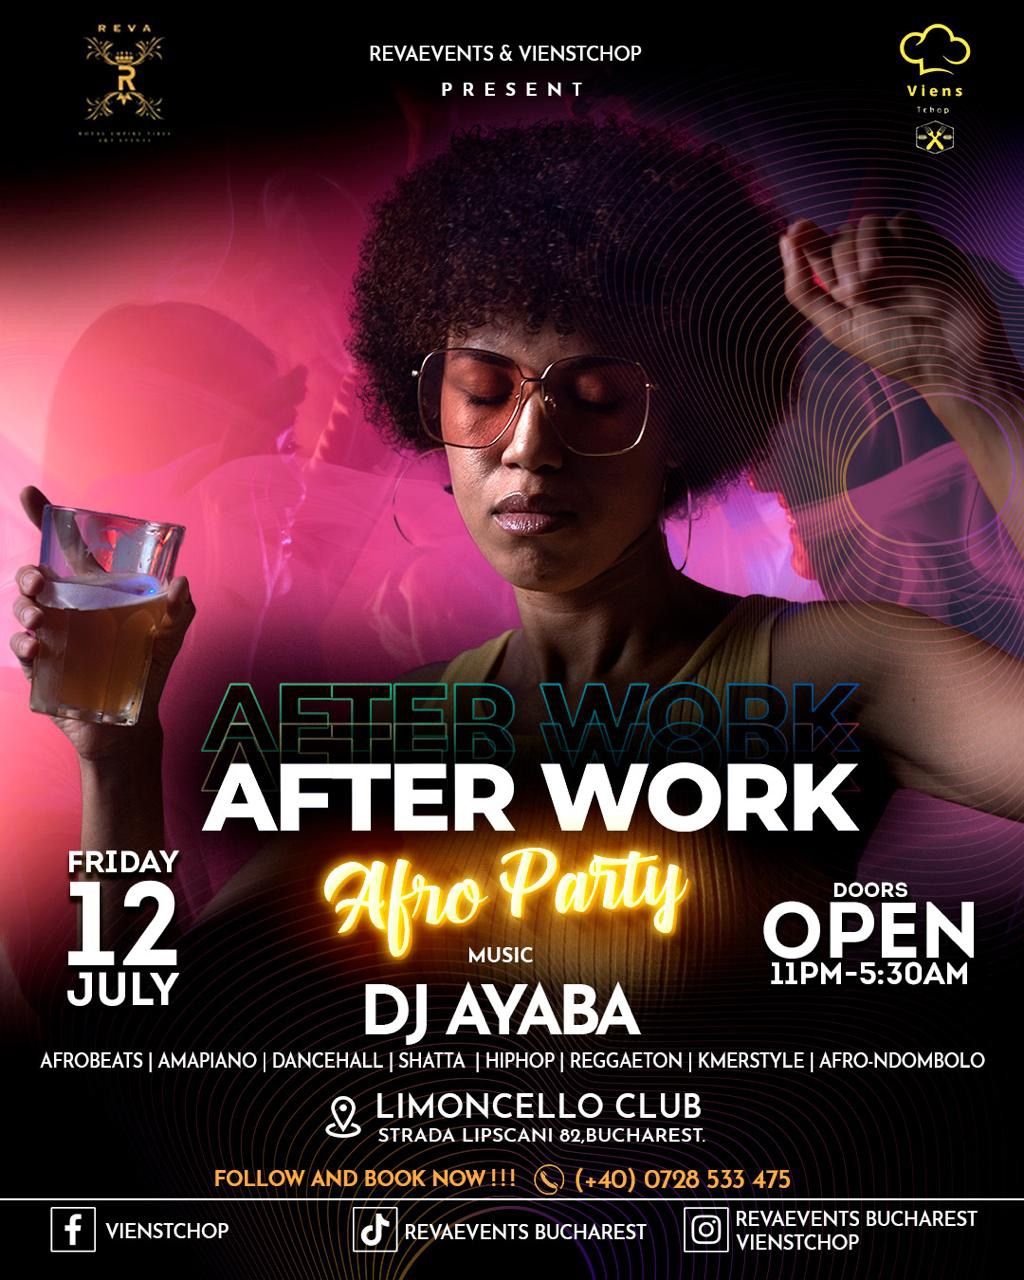 After Work Afro party \ud83c\udf89 